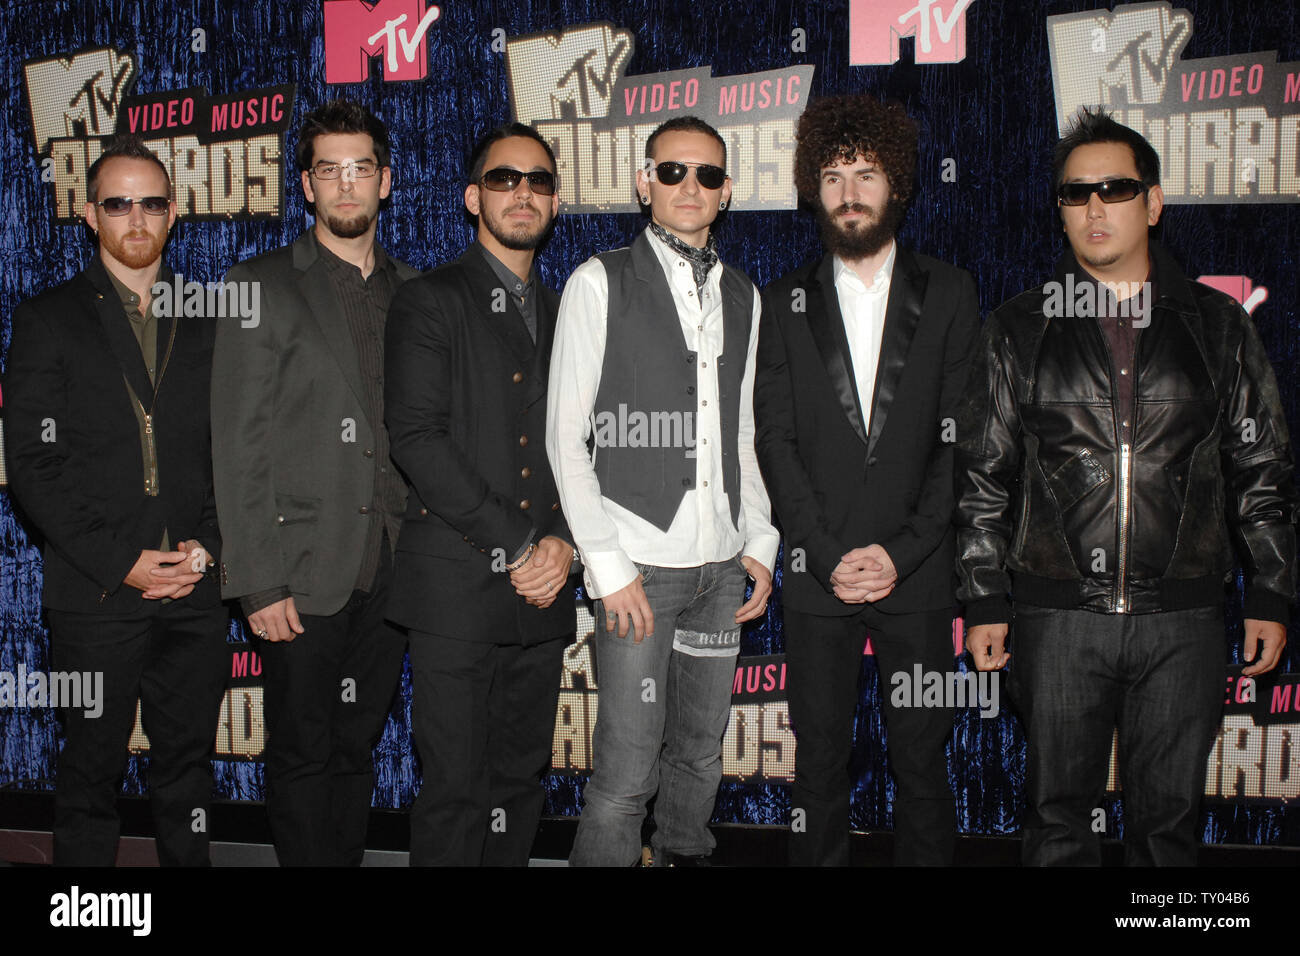 Linkin Park arrives for the MTV Video Music Awards at the Palms Hotel and Casino in Las Vegas on September 9, 2007.  (UPI Photo/Jim Ruymen) Stock Photo